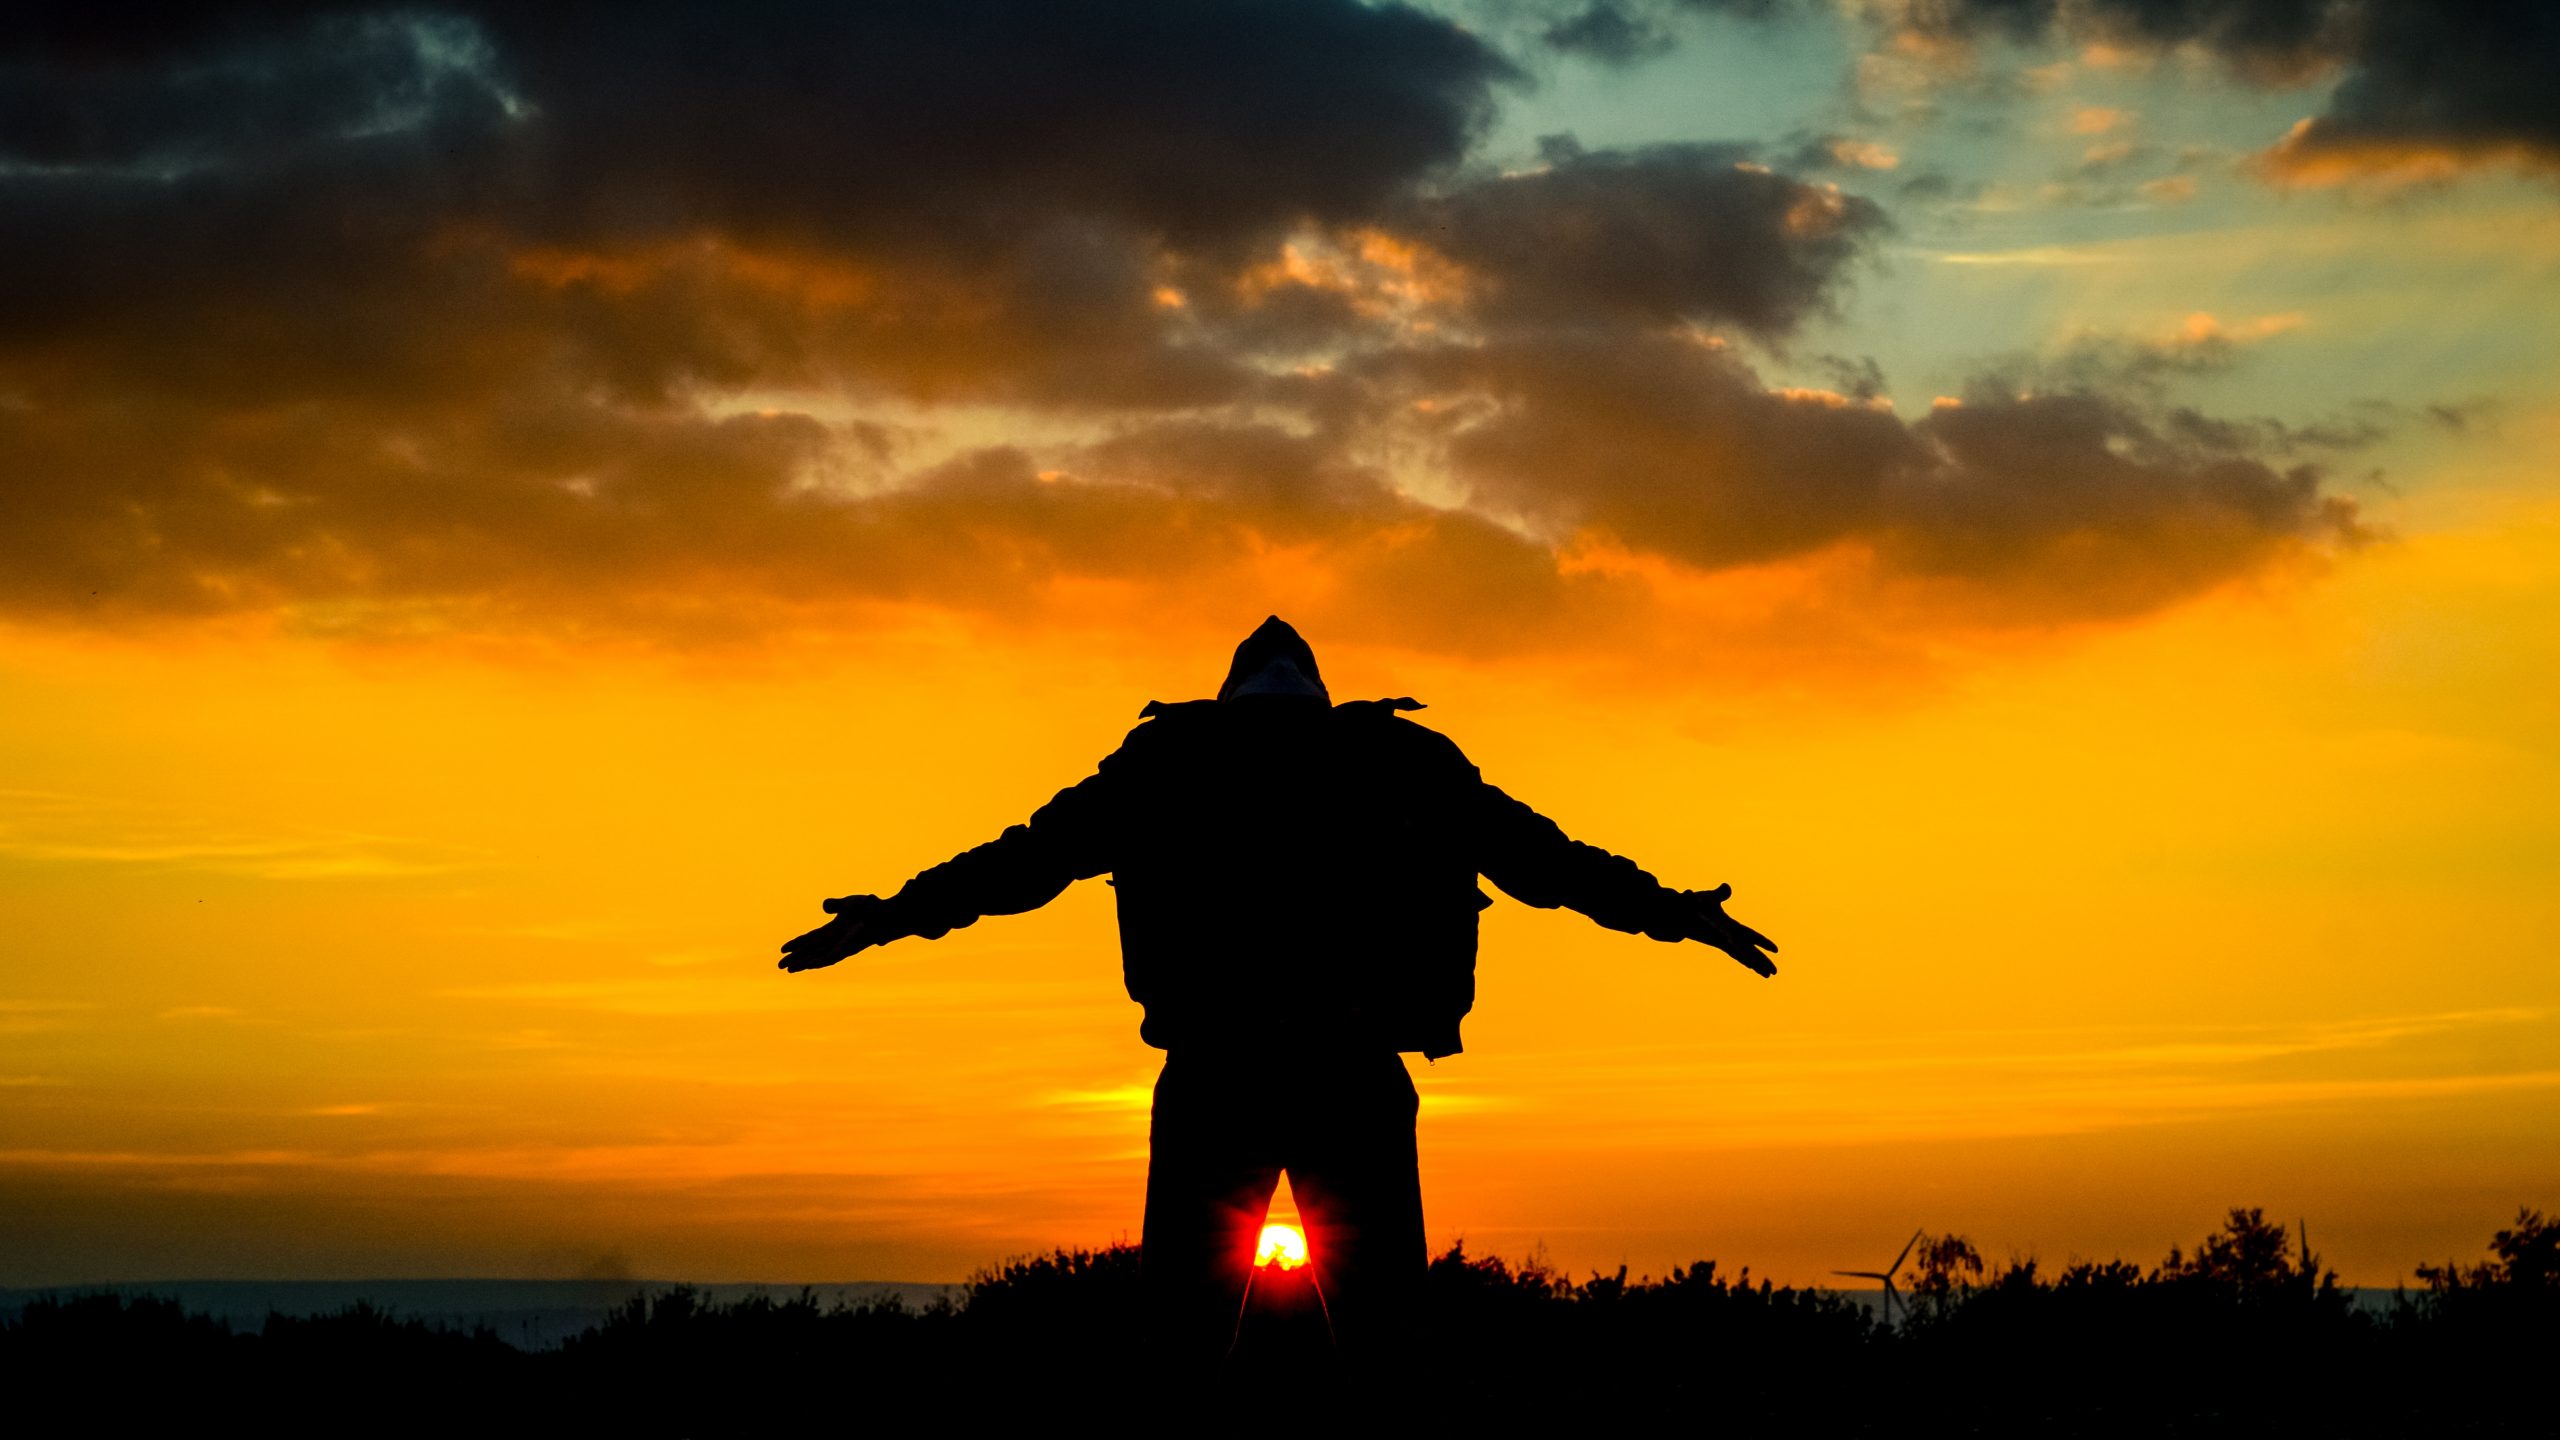 Silhouette of a person with arms outstretched against a vibrant sunset sky.